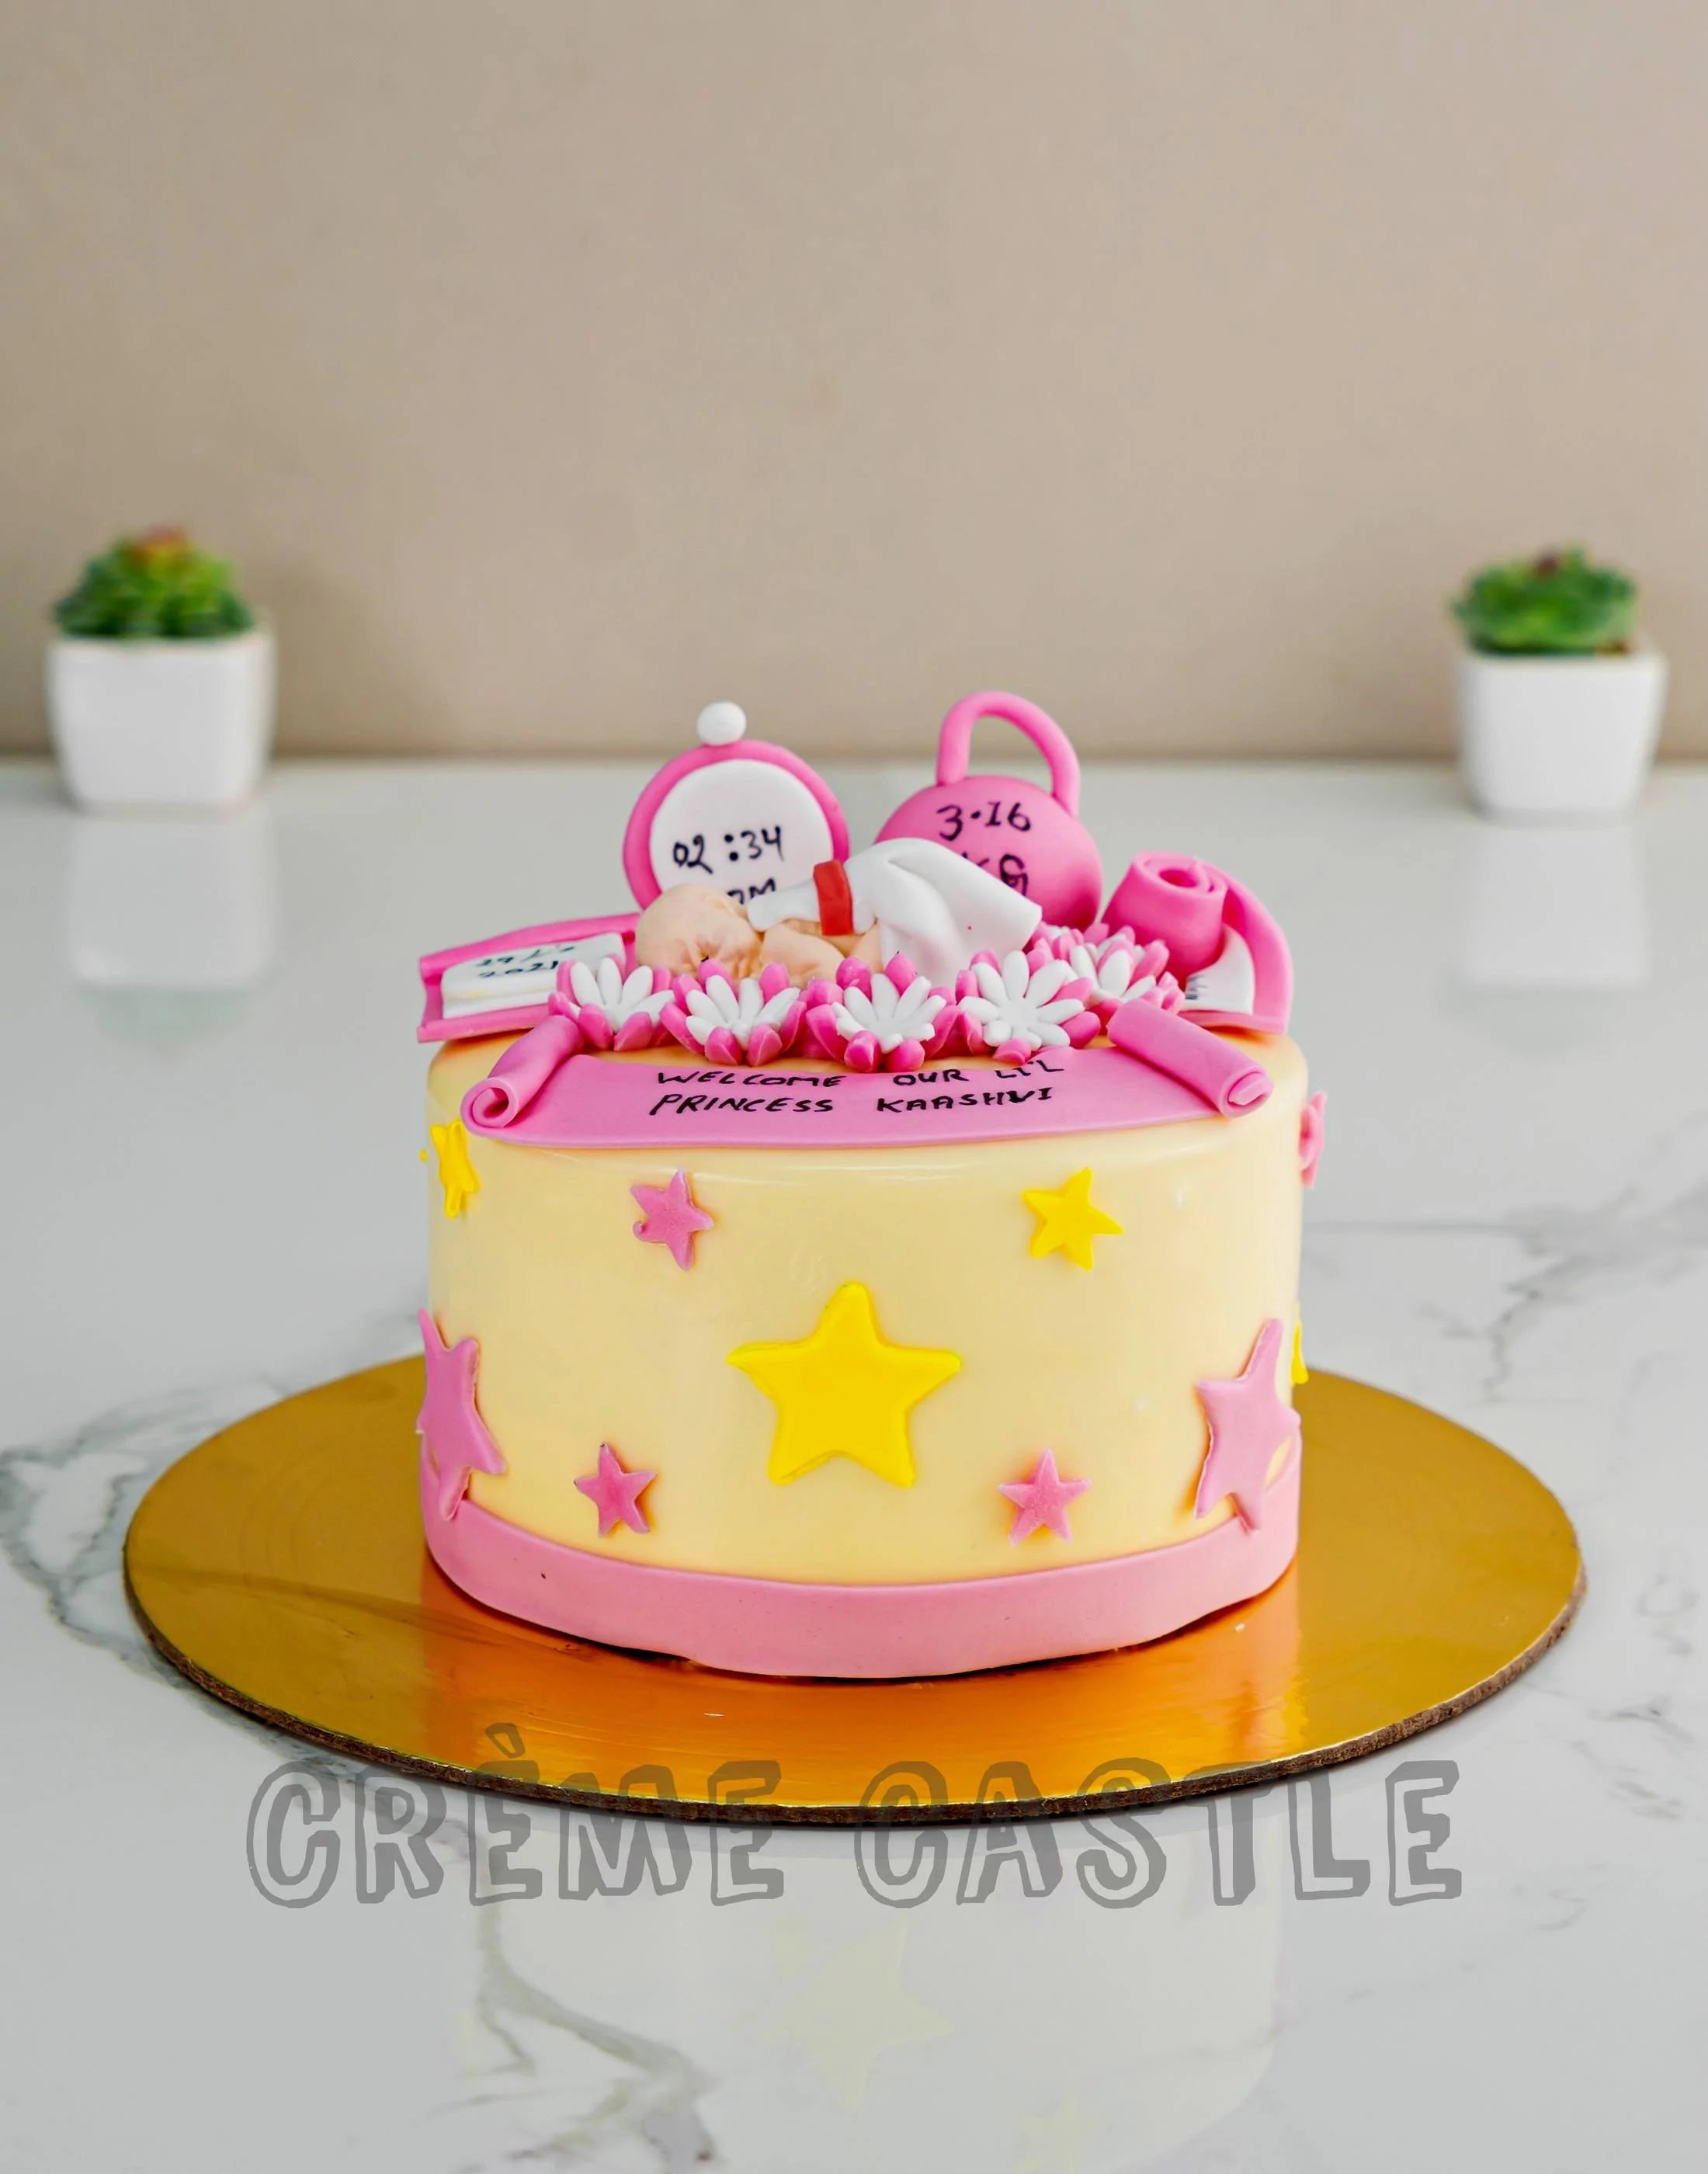 1 KIDS CAKE WITH CHARACTER TOPPERS – Princess cakes and confectioneries